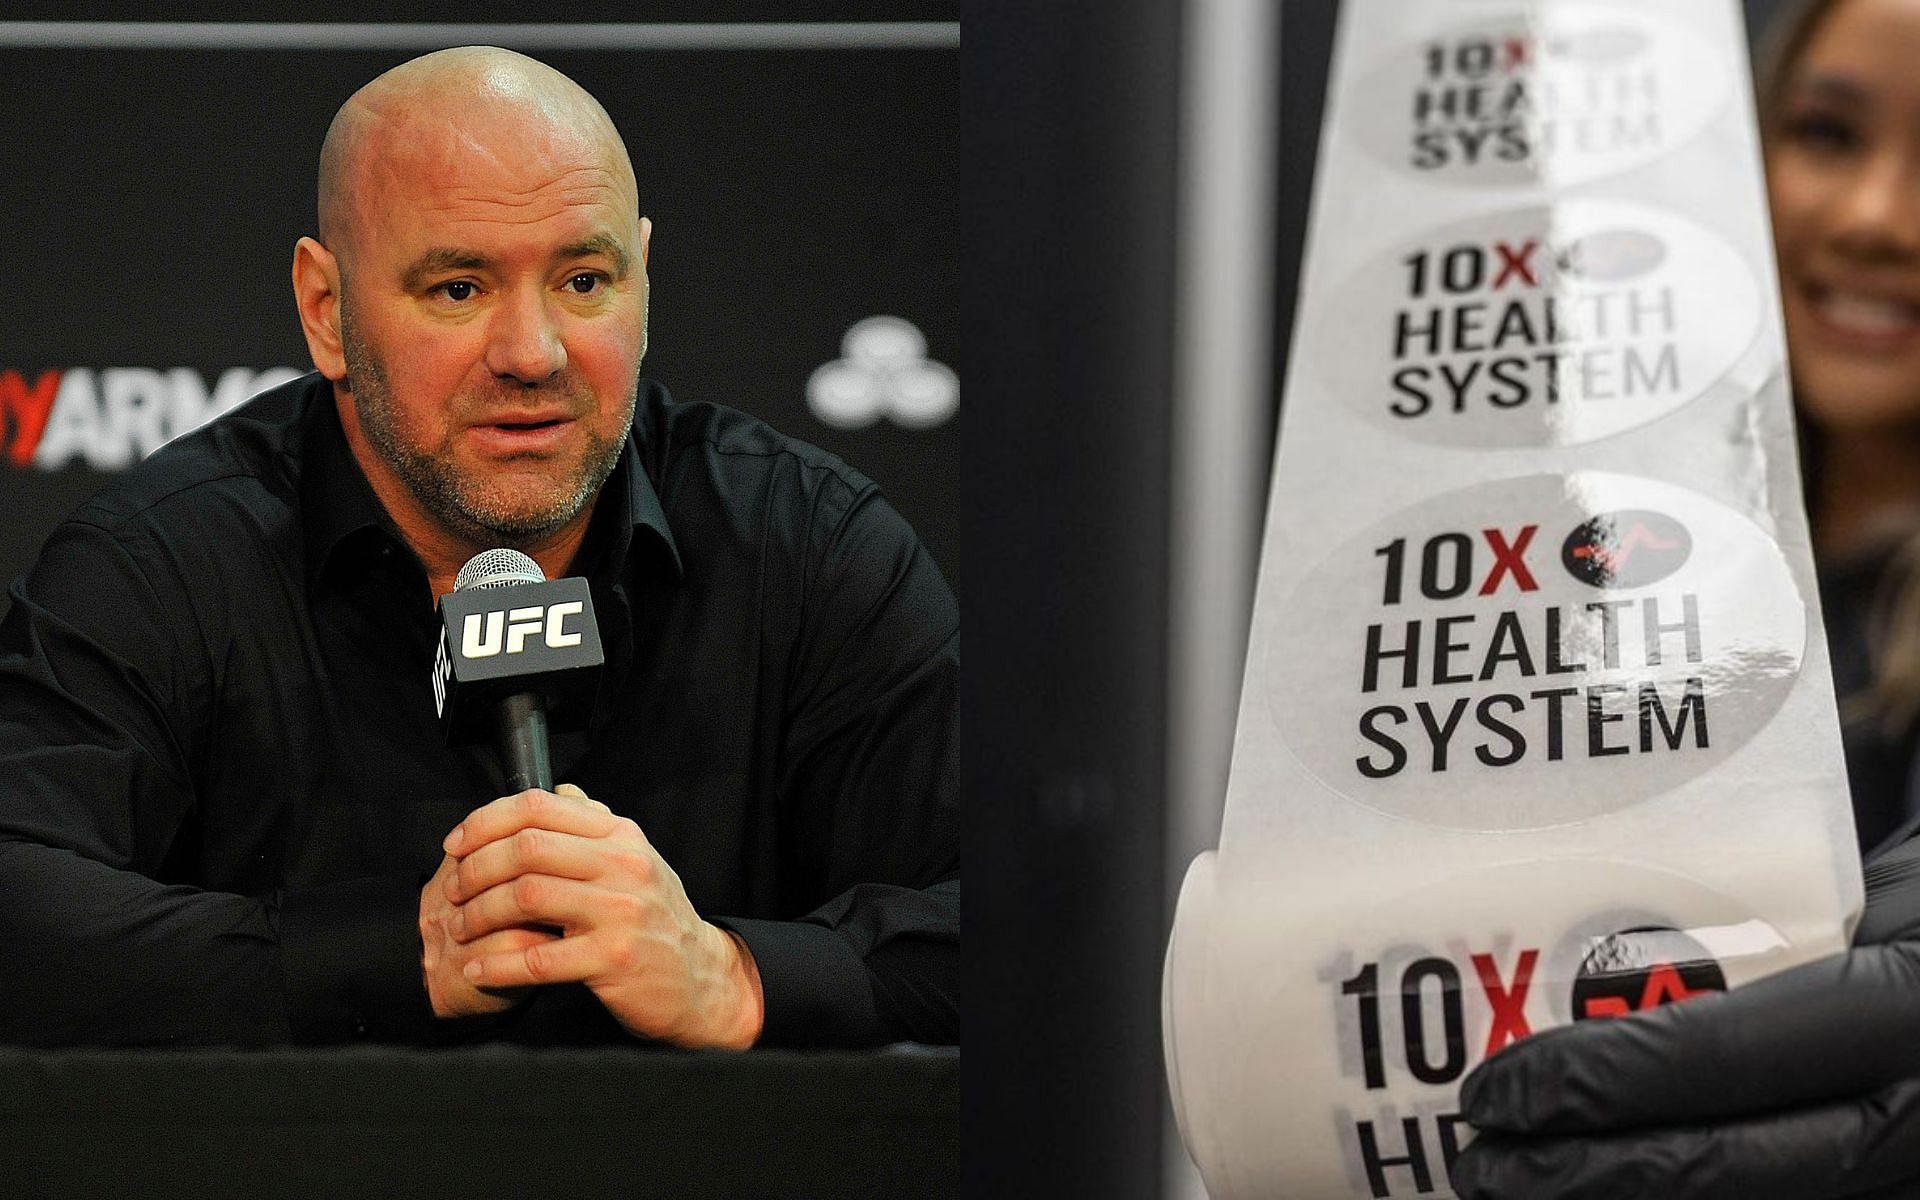 Dana White (left) 10X Health System promotional material (right) (image courtesy @10xhealthsystem)